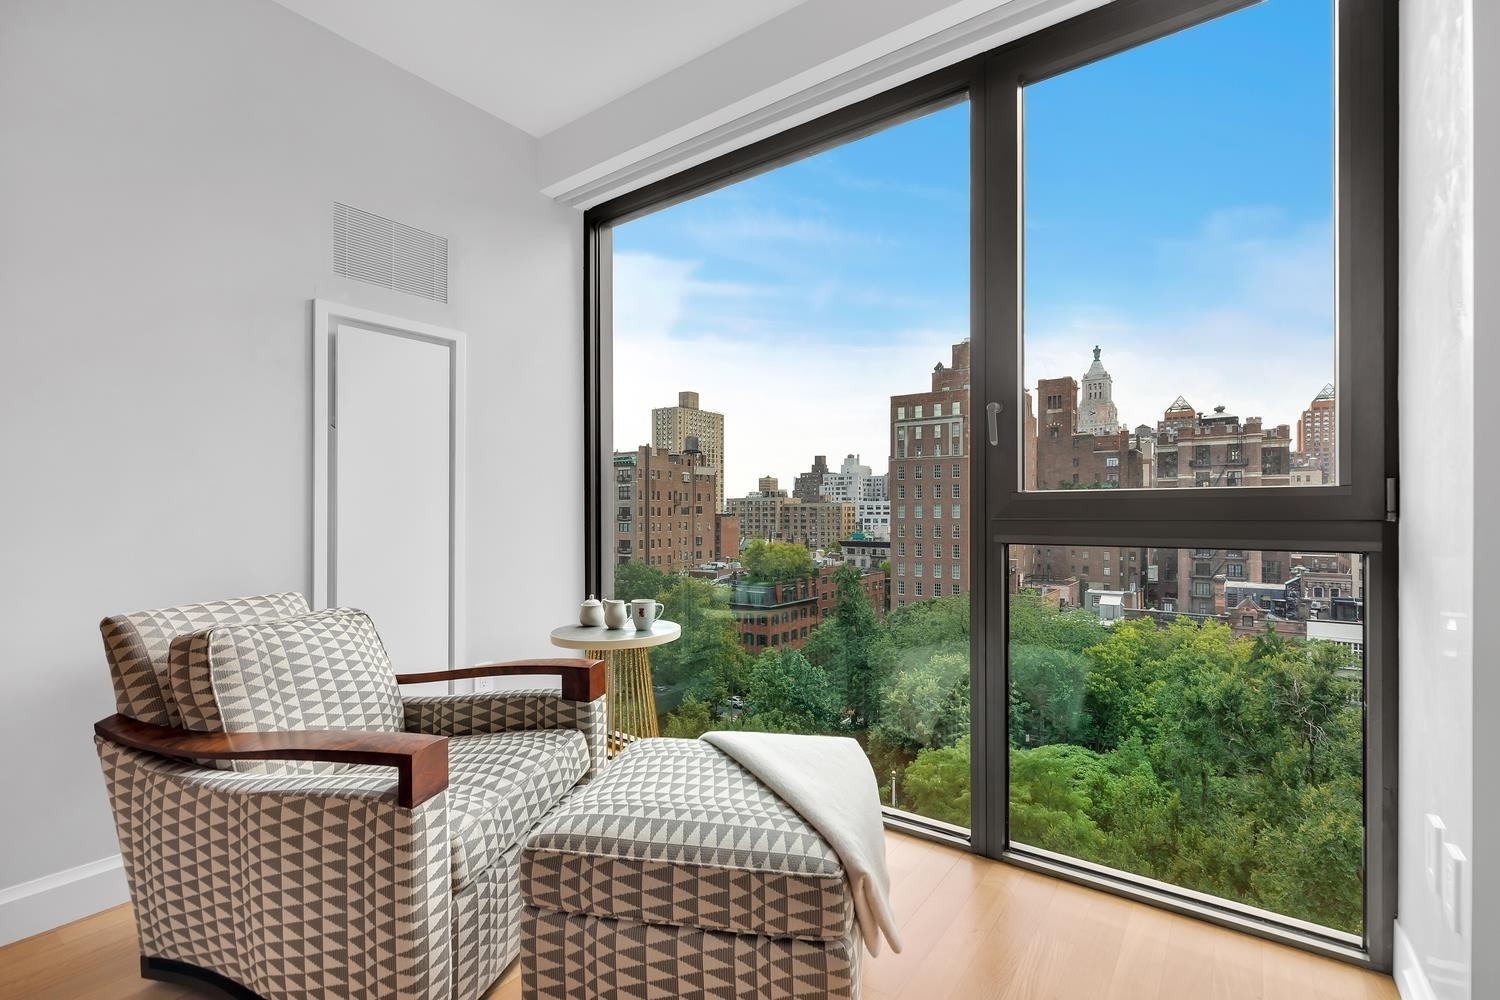 Co-op Properties for Sale at 50 GRAMERCY PARK N, 12A Gramercy Park, New York, New York 10010